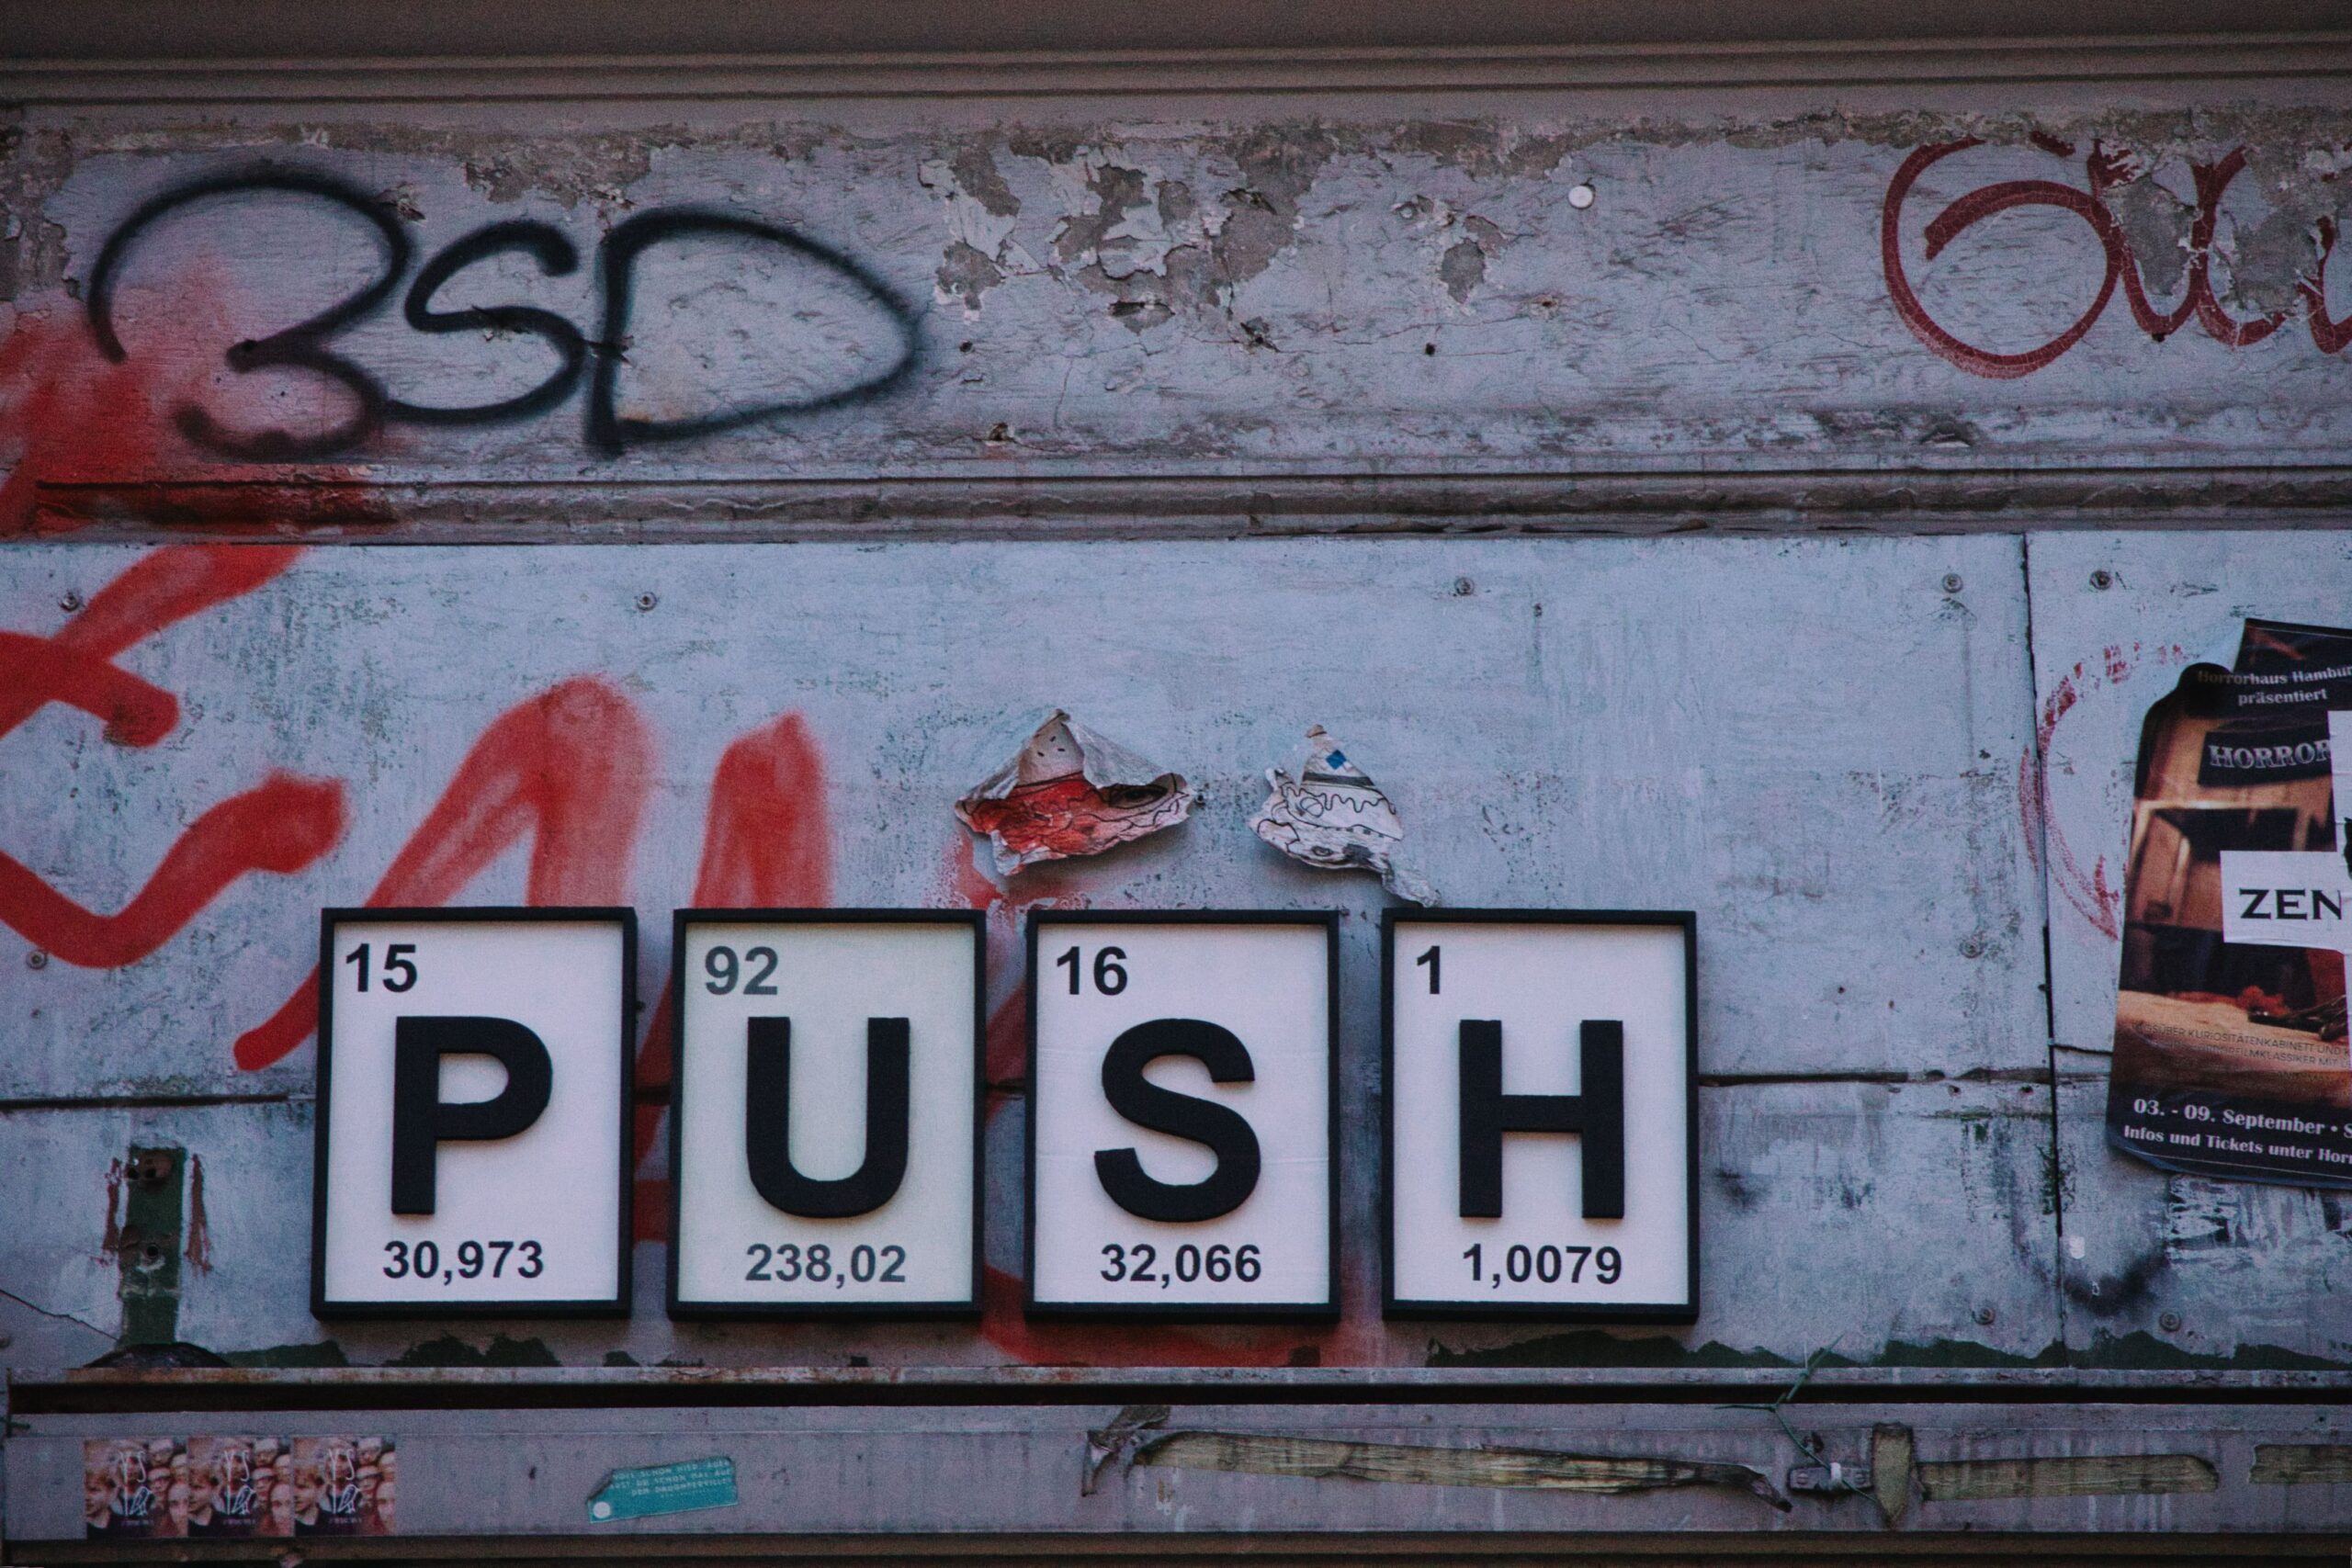 A graffiti'd wall with the chemical symbols from the periodic table used to spell out "PUSH."